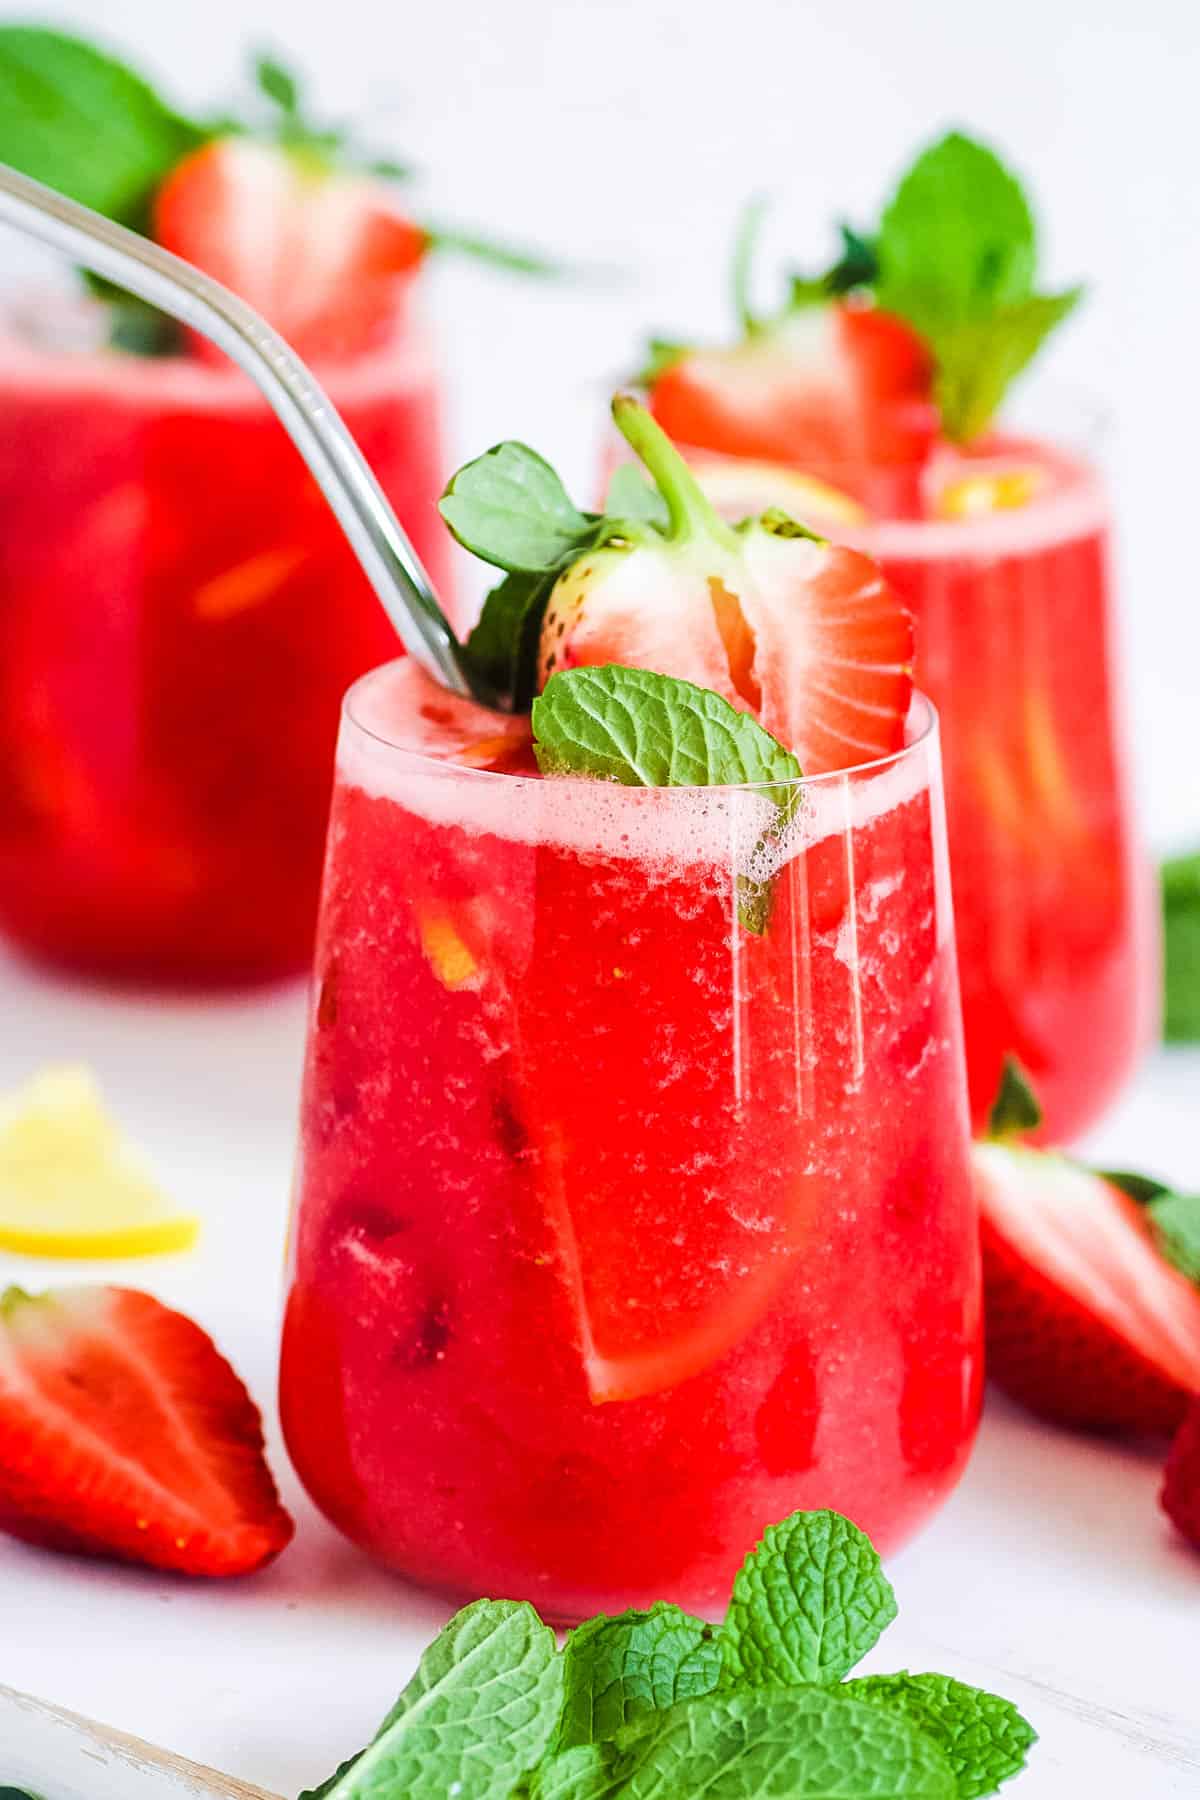 Strawberry juice in a glass with a straw, garnished with fresh strawberries and mint.